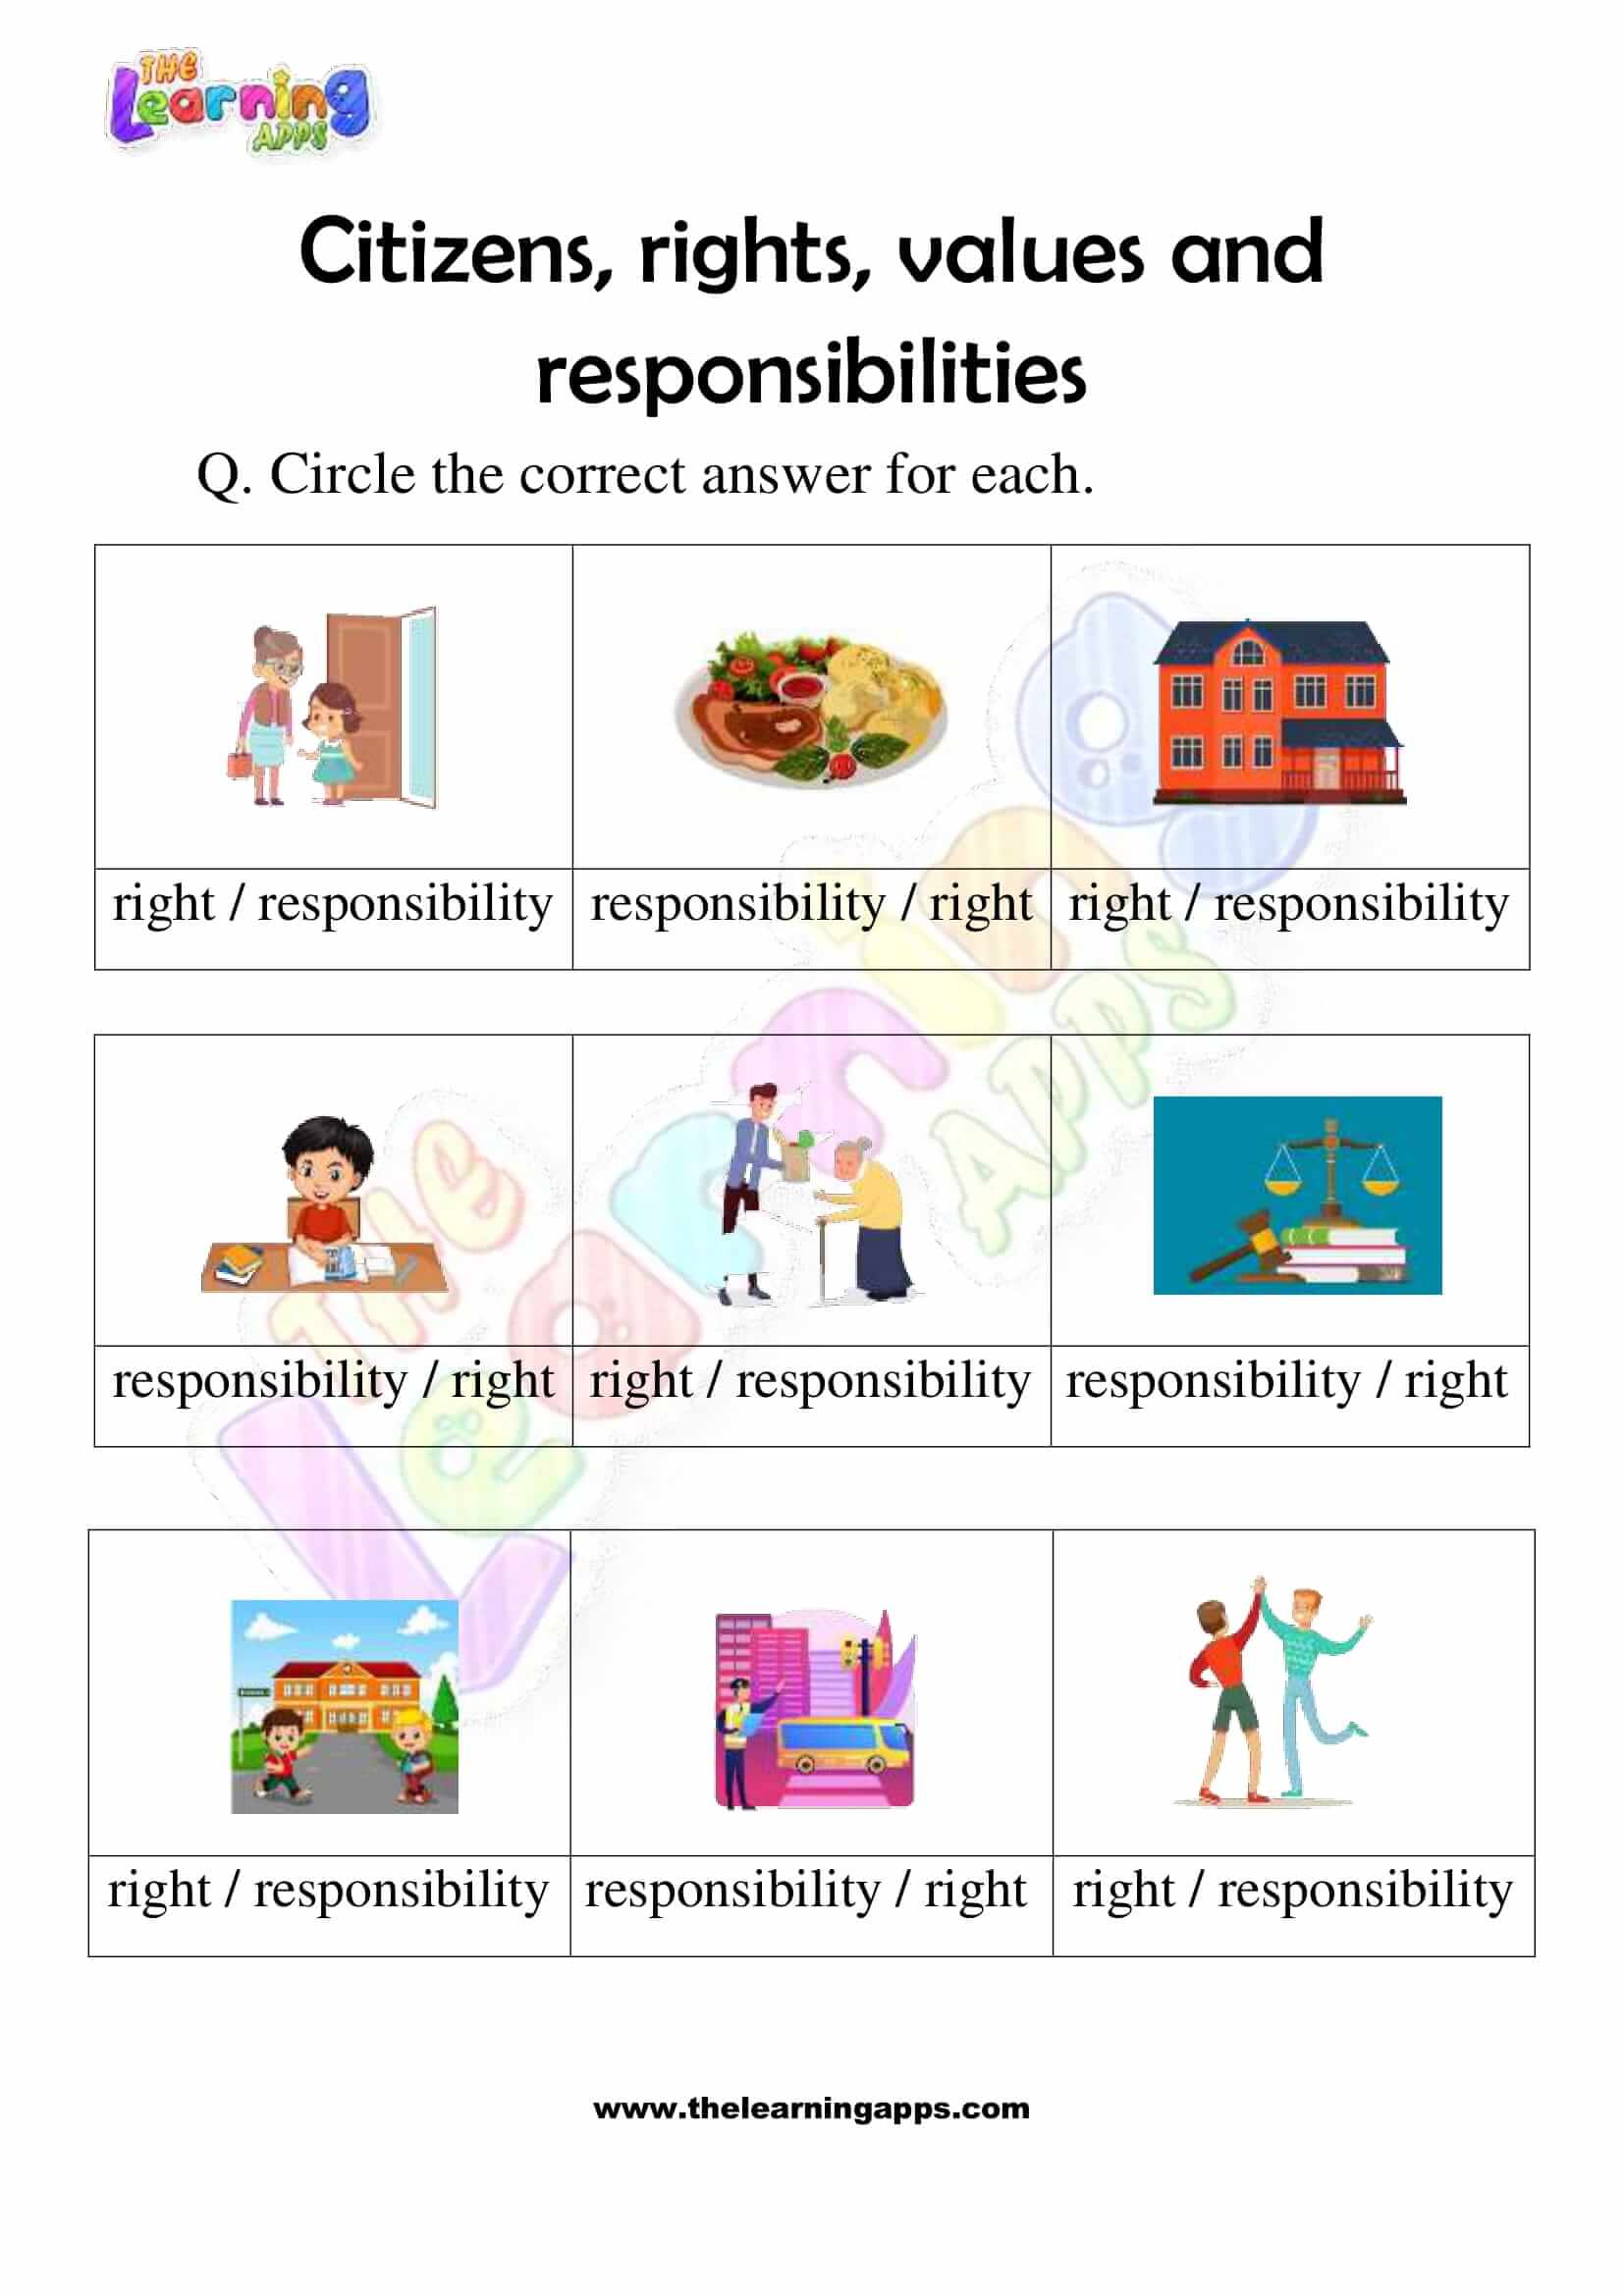 Free Citizen rights and responsibilities Worksheets 10 for Kids